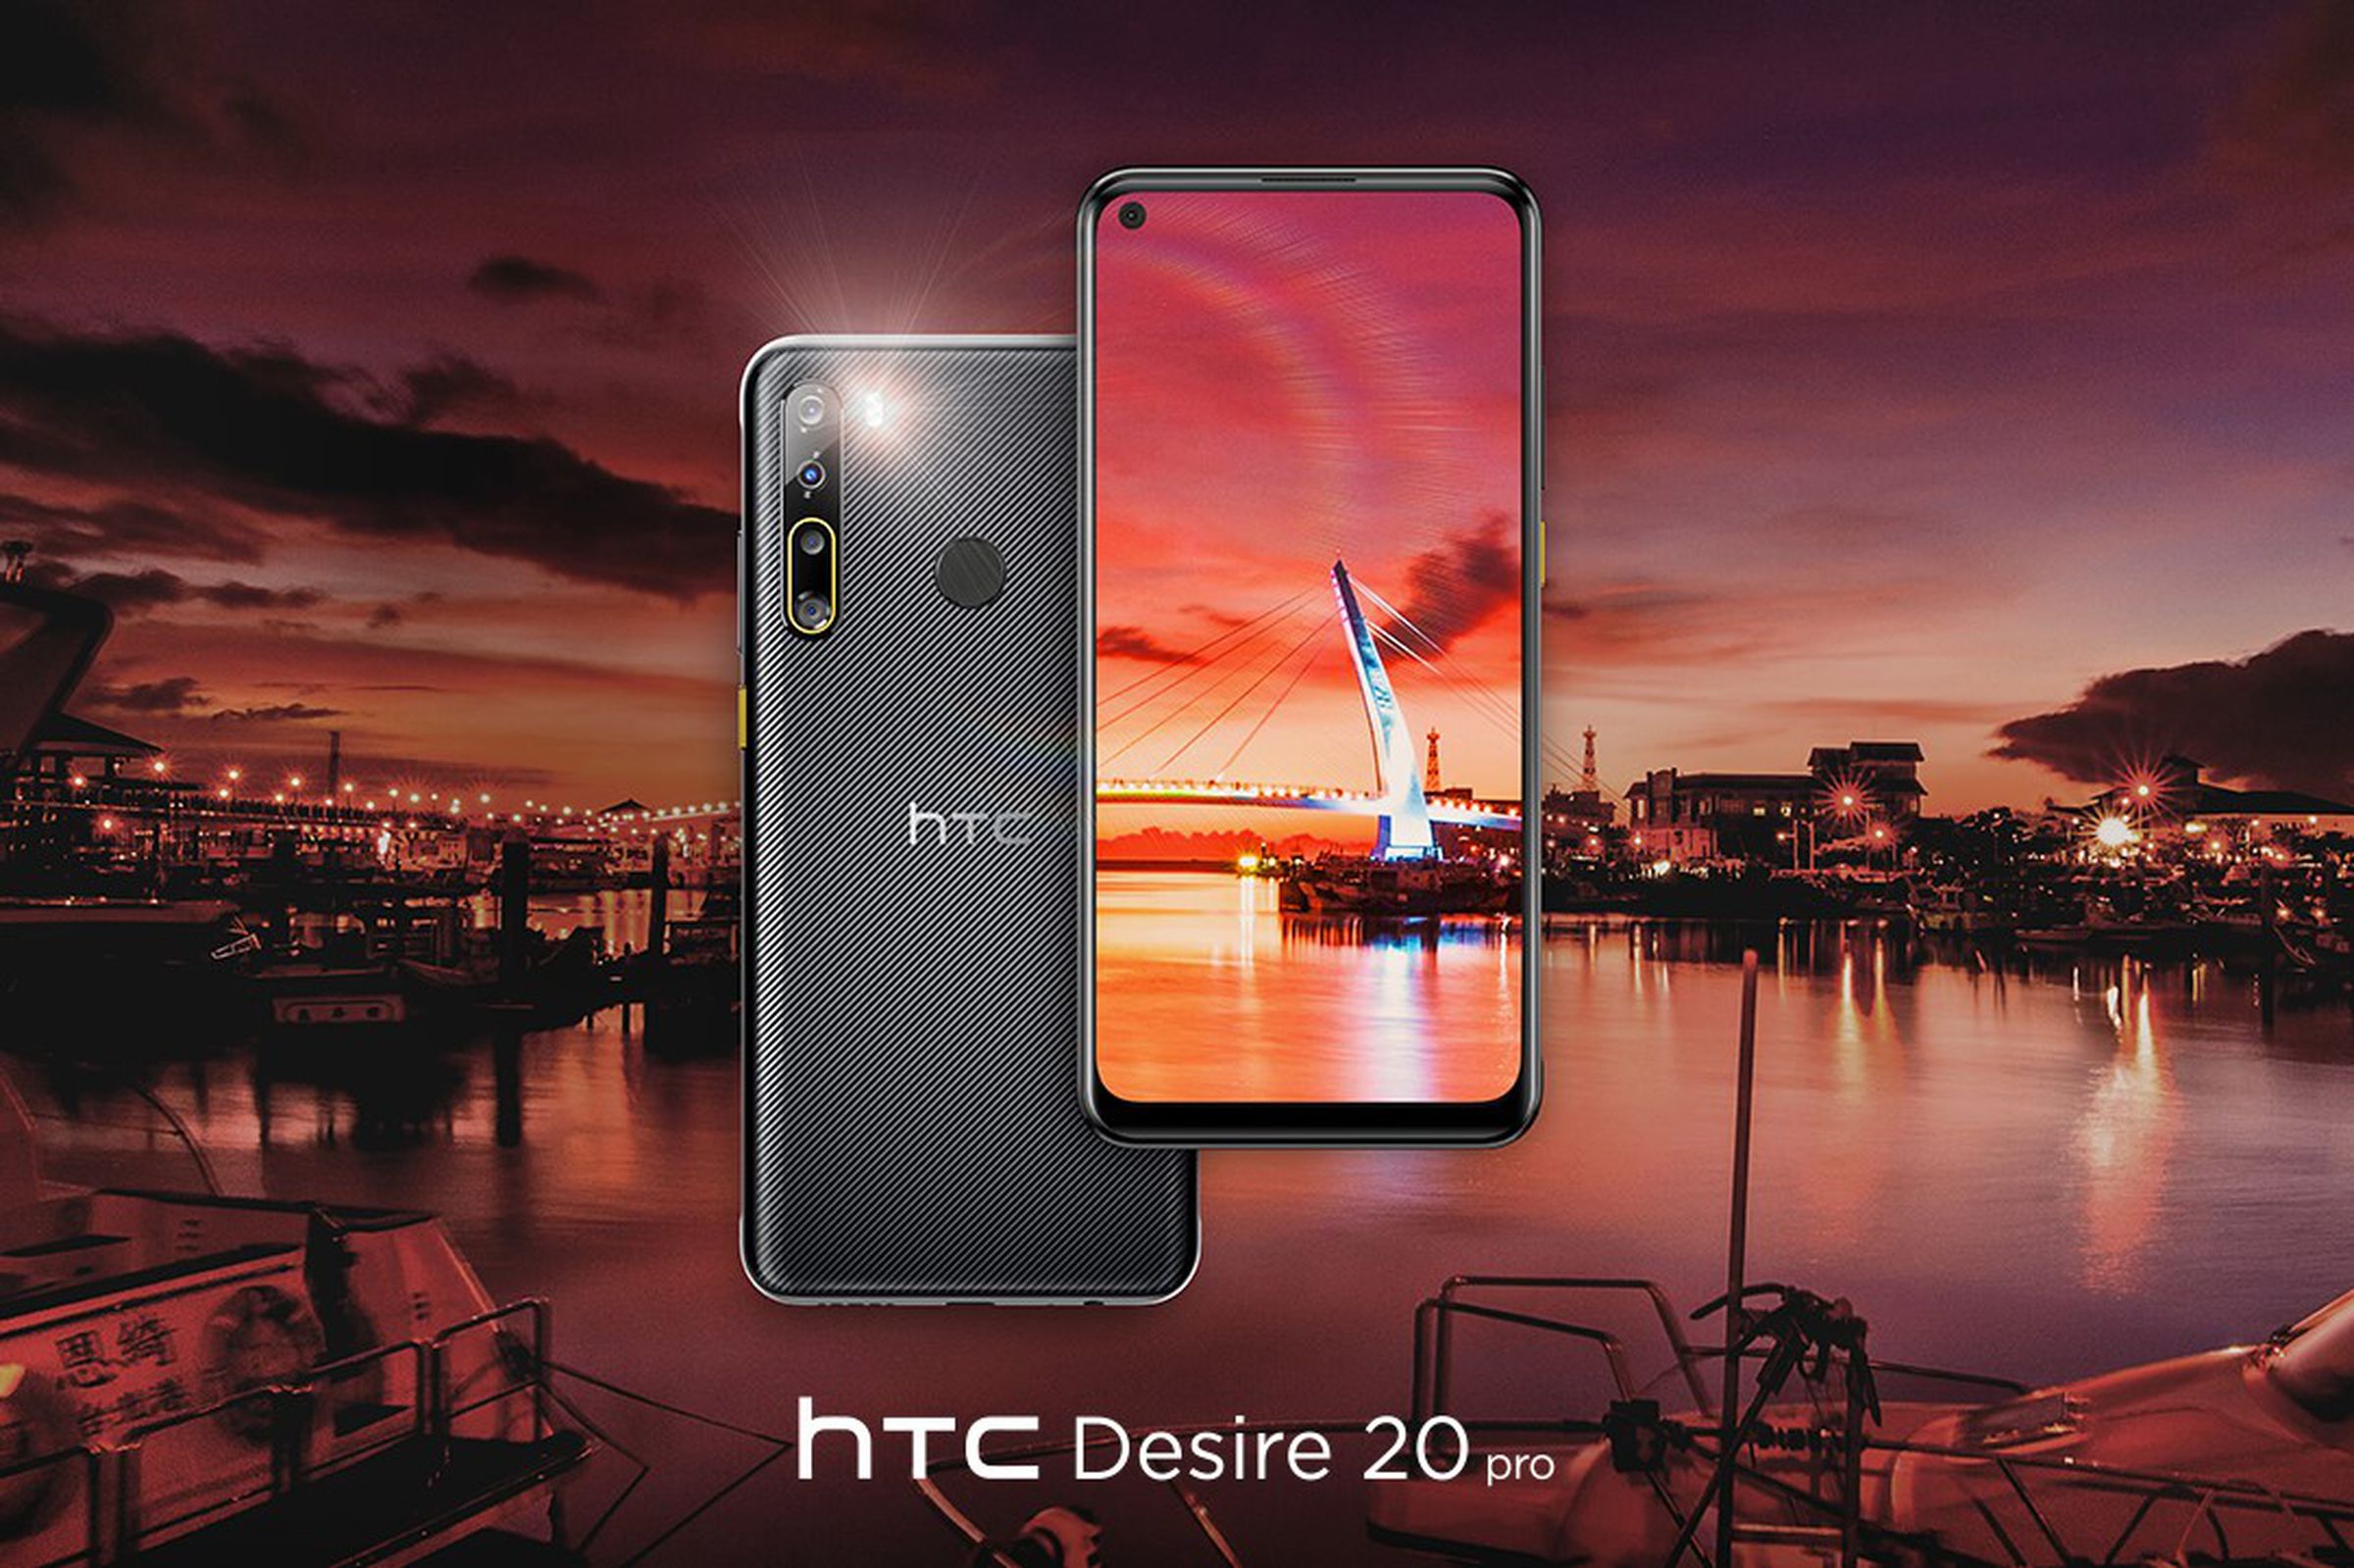 The HTC Desire 20 is a step-down 4G model.